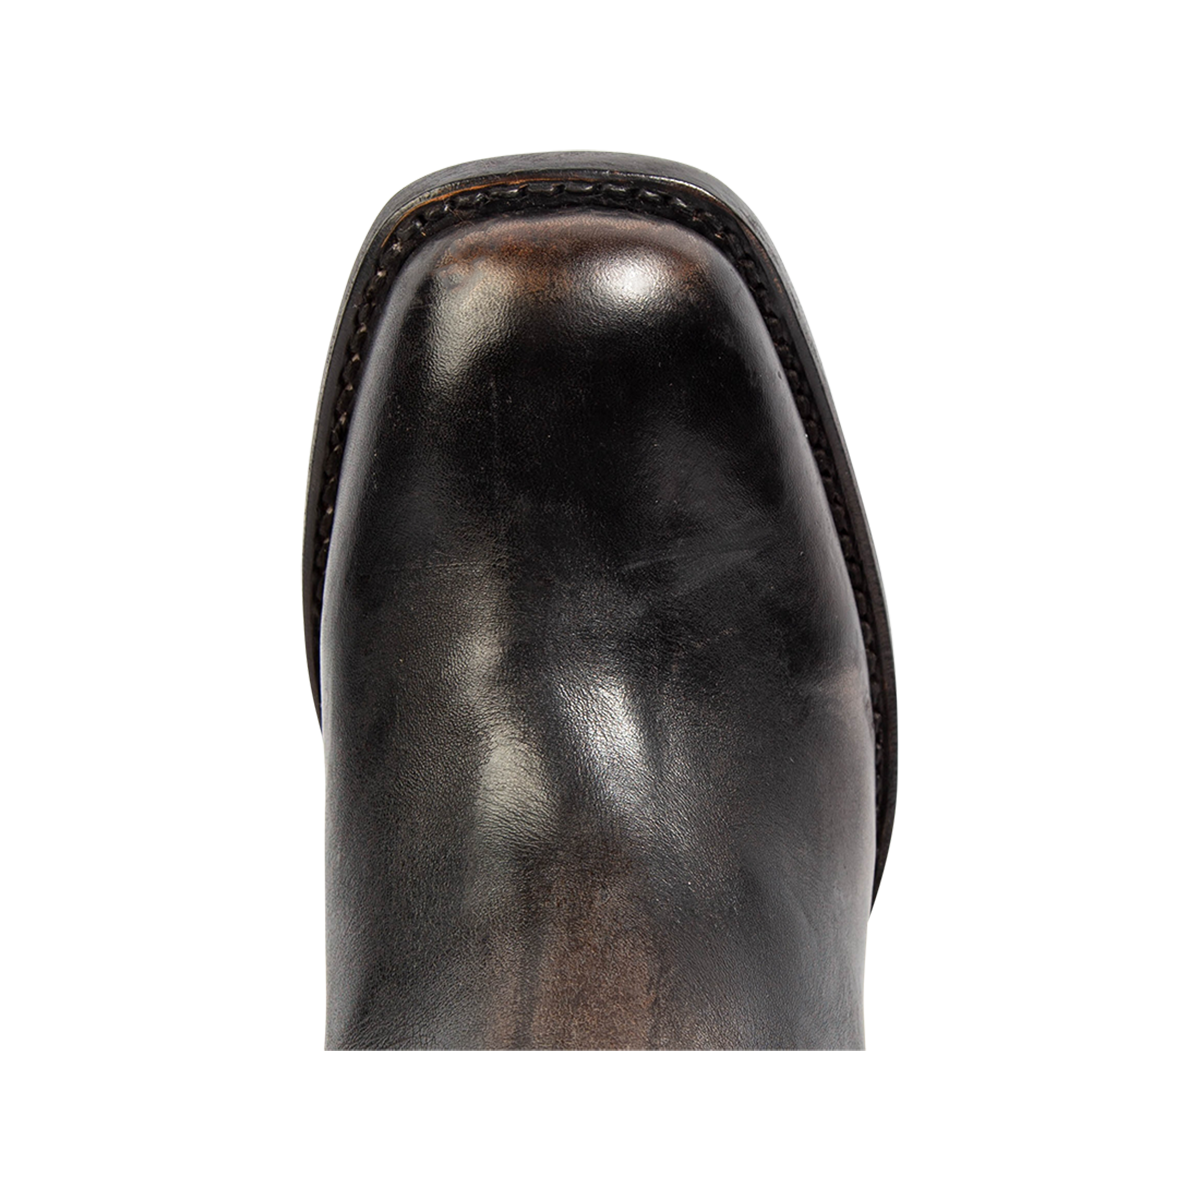 Top view showing a square toe on FREEBIRD women's Dillon black leather boot